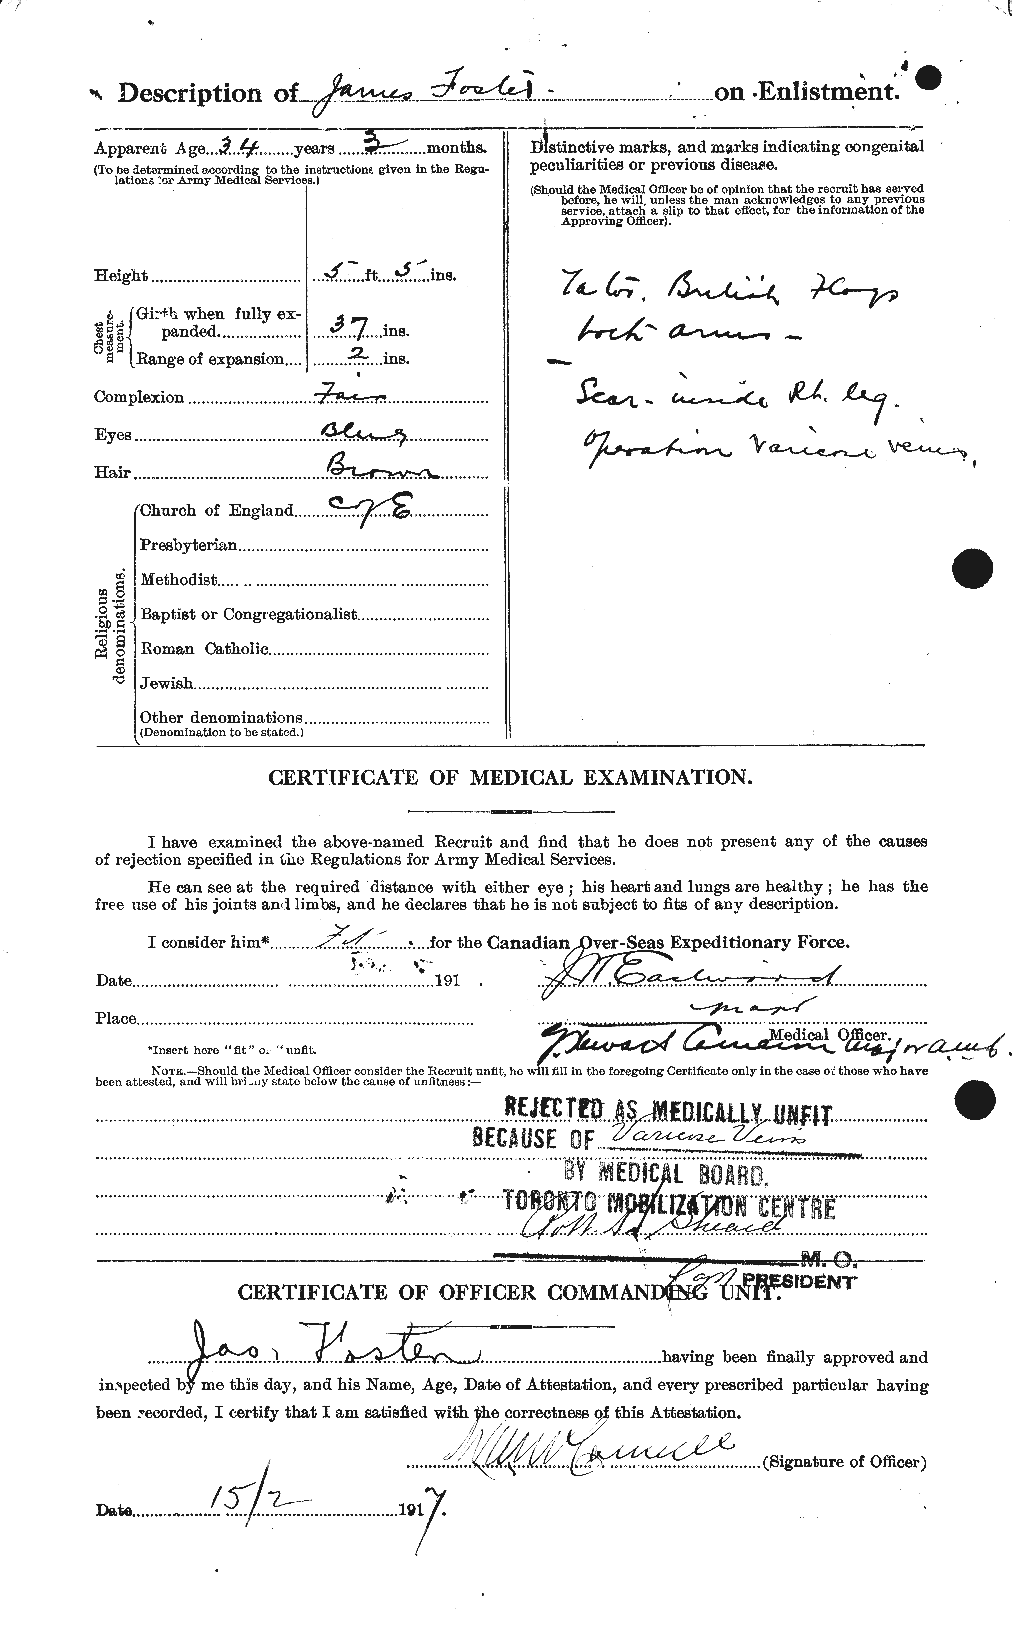 Personnel Records of the First World War - CEF 333277b